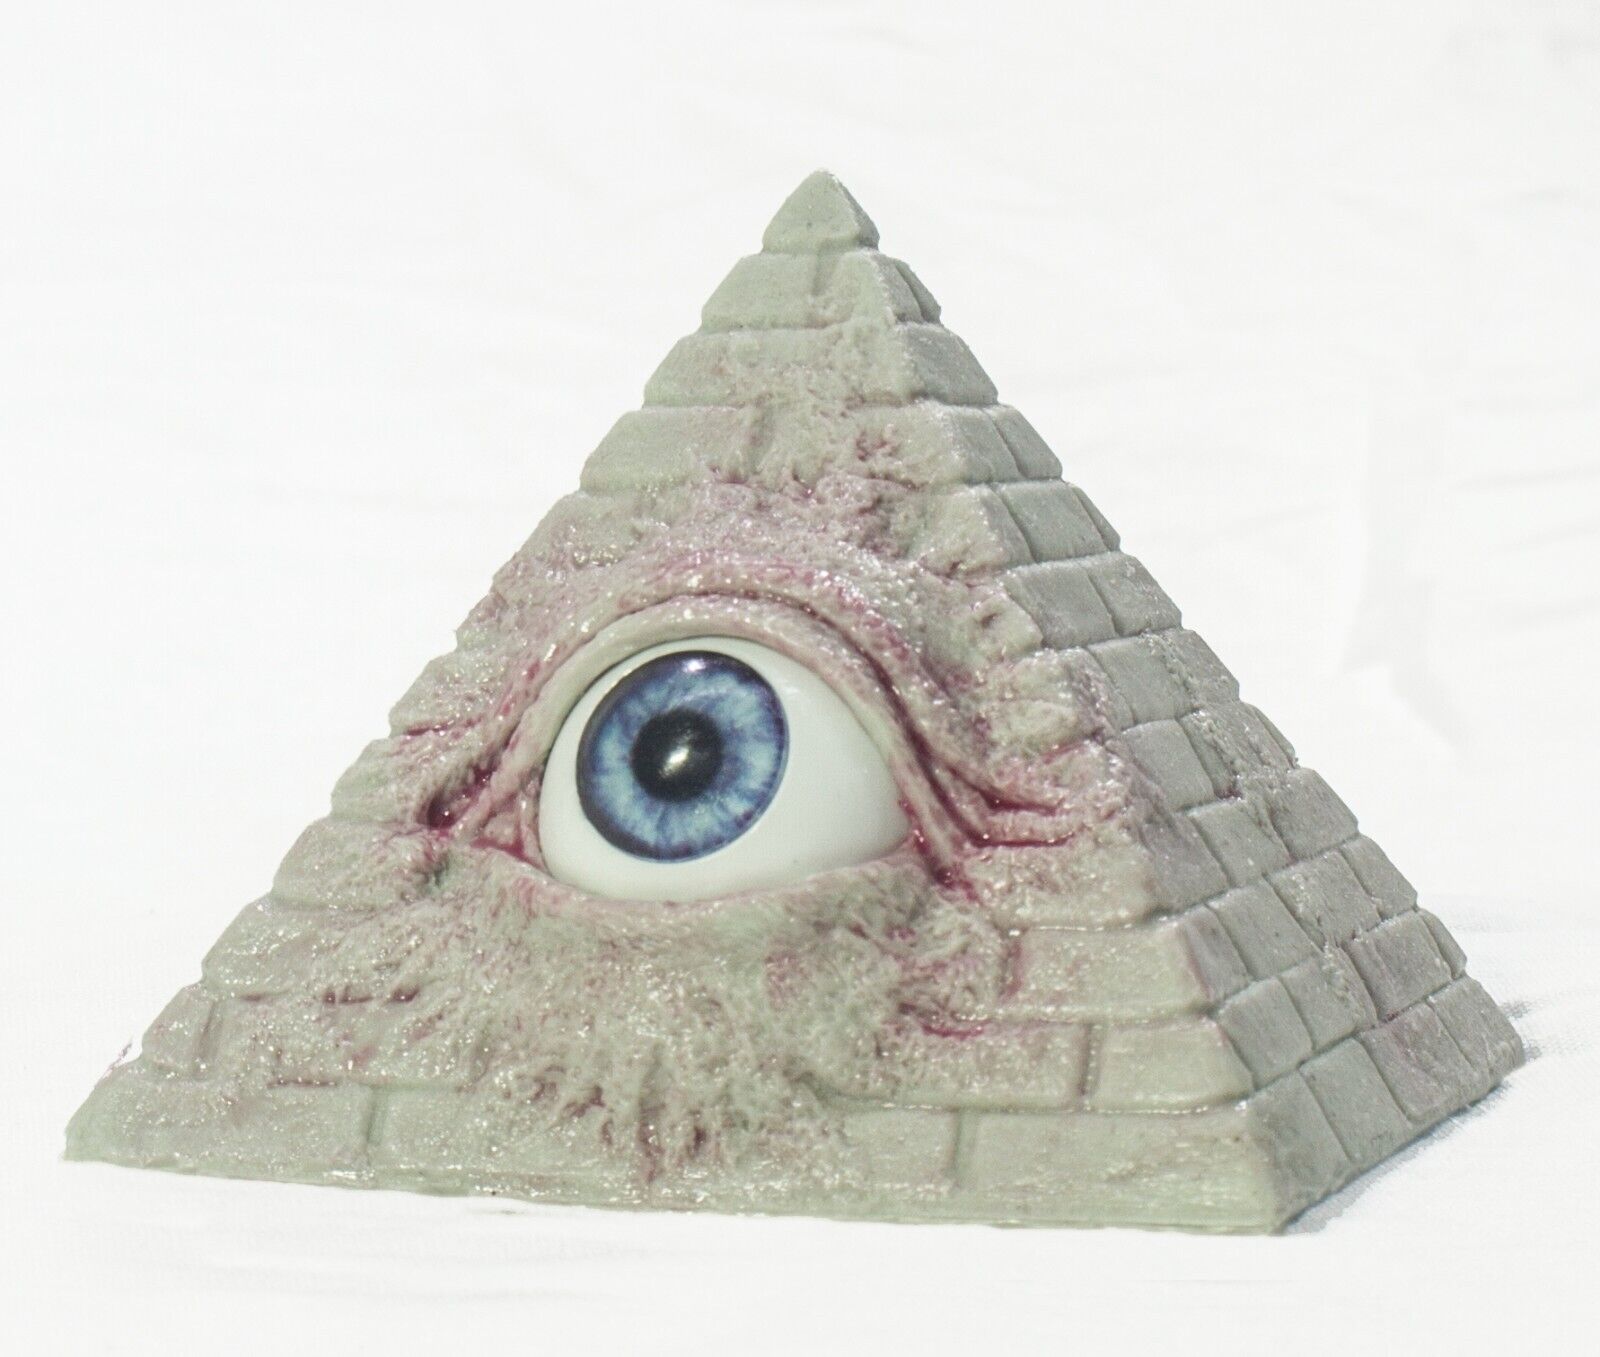 The All Seeing Pyramid